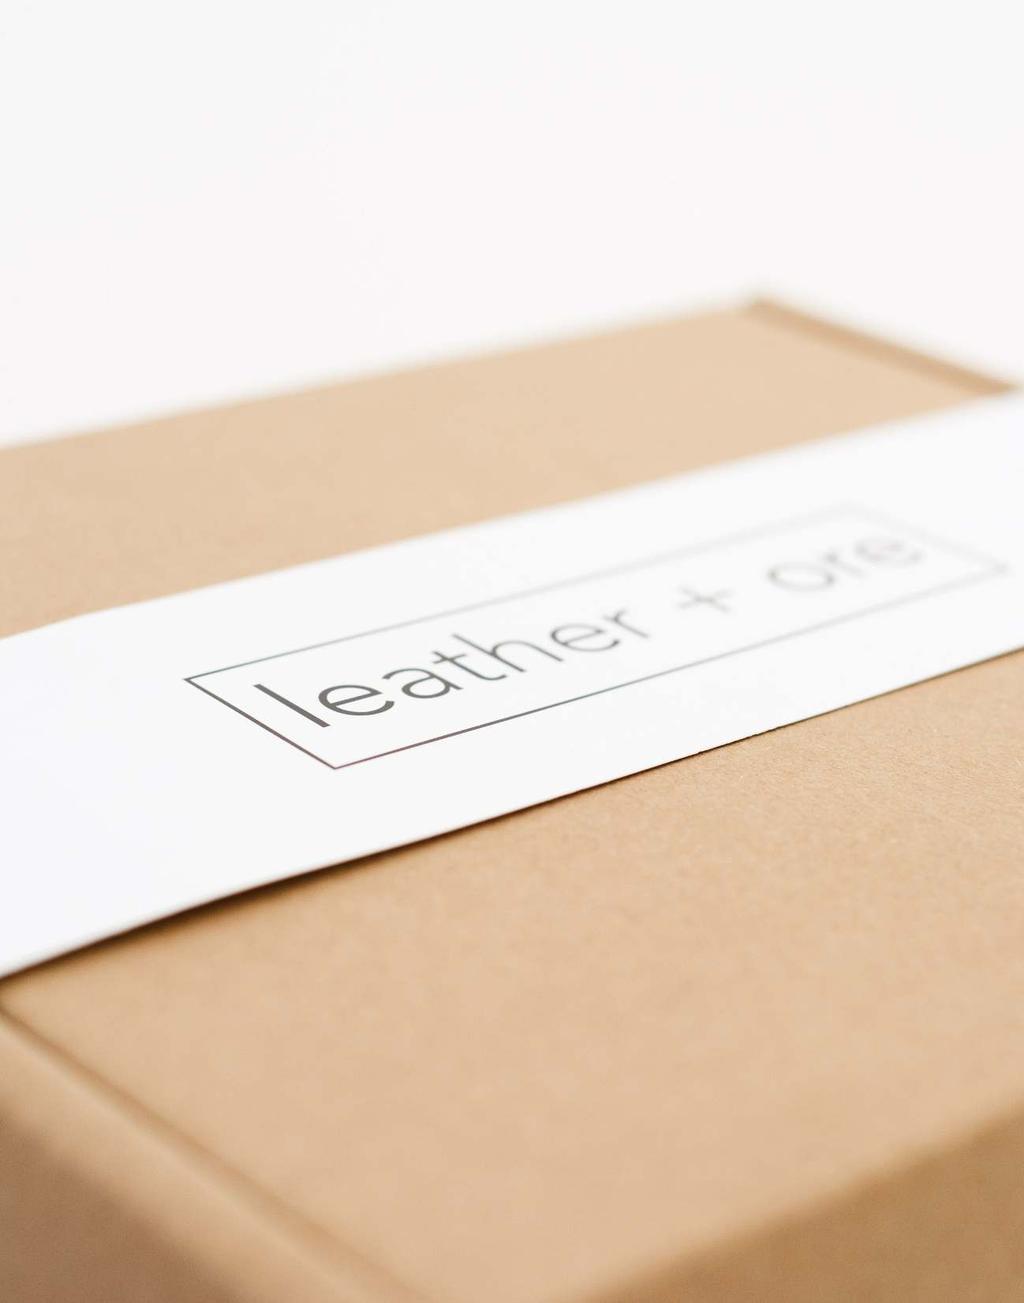 BOX DETAILS: Box Dimensions: 11.25 x 3.5 x 9.25 Price includes printed paper band.